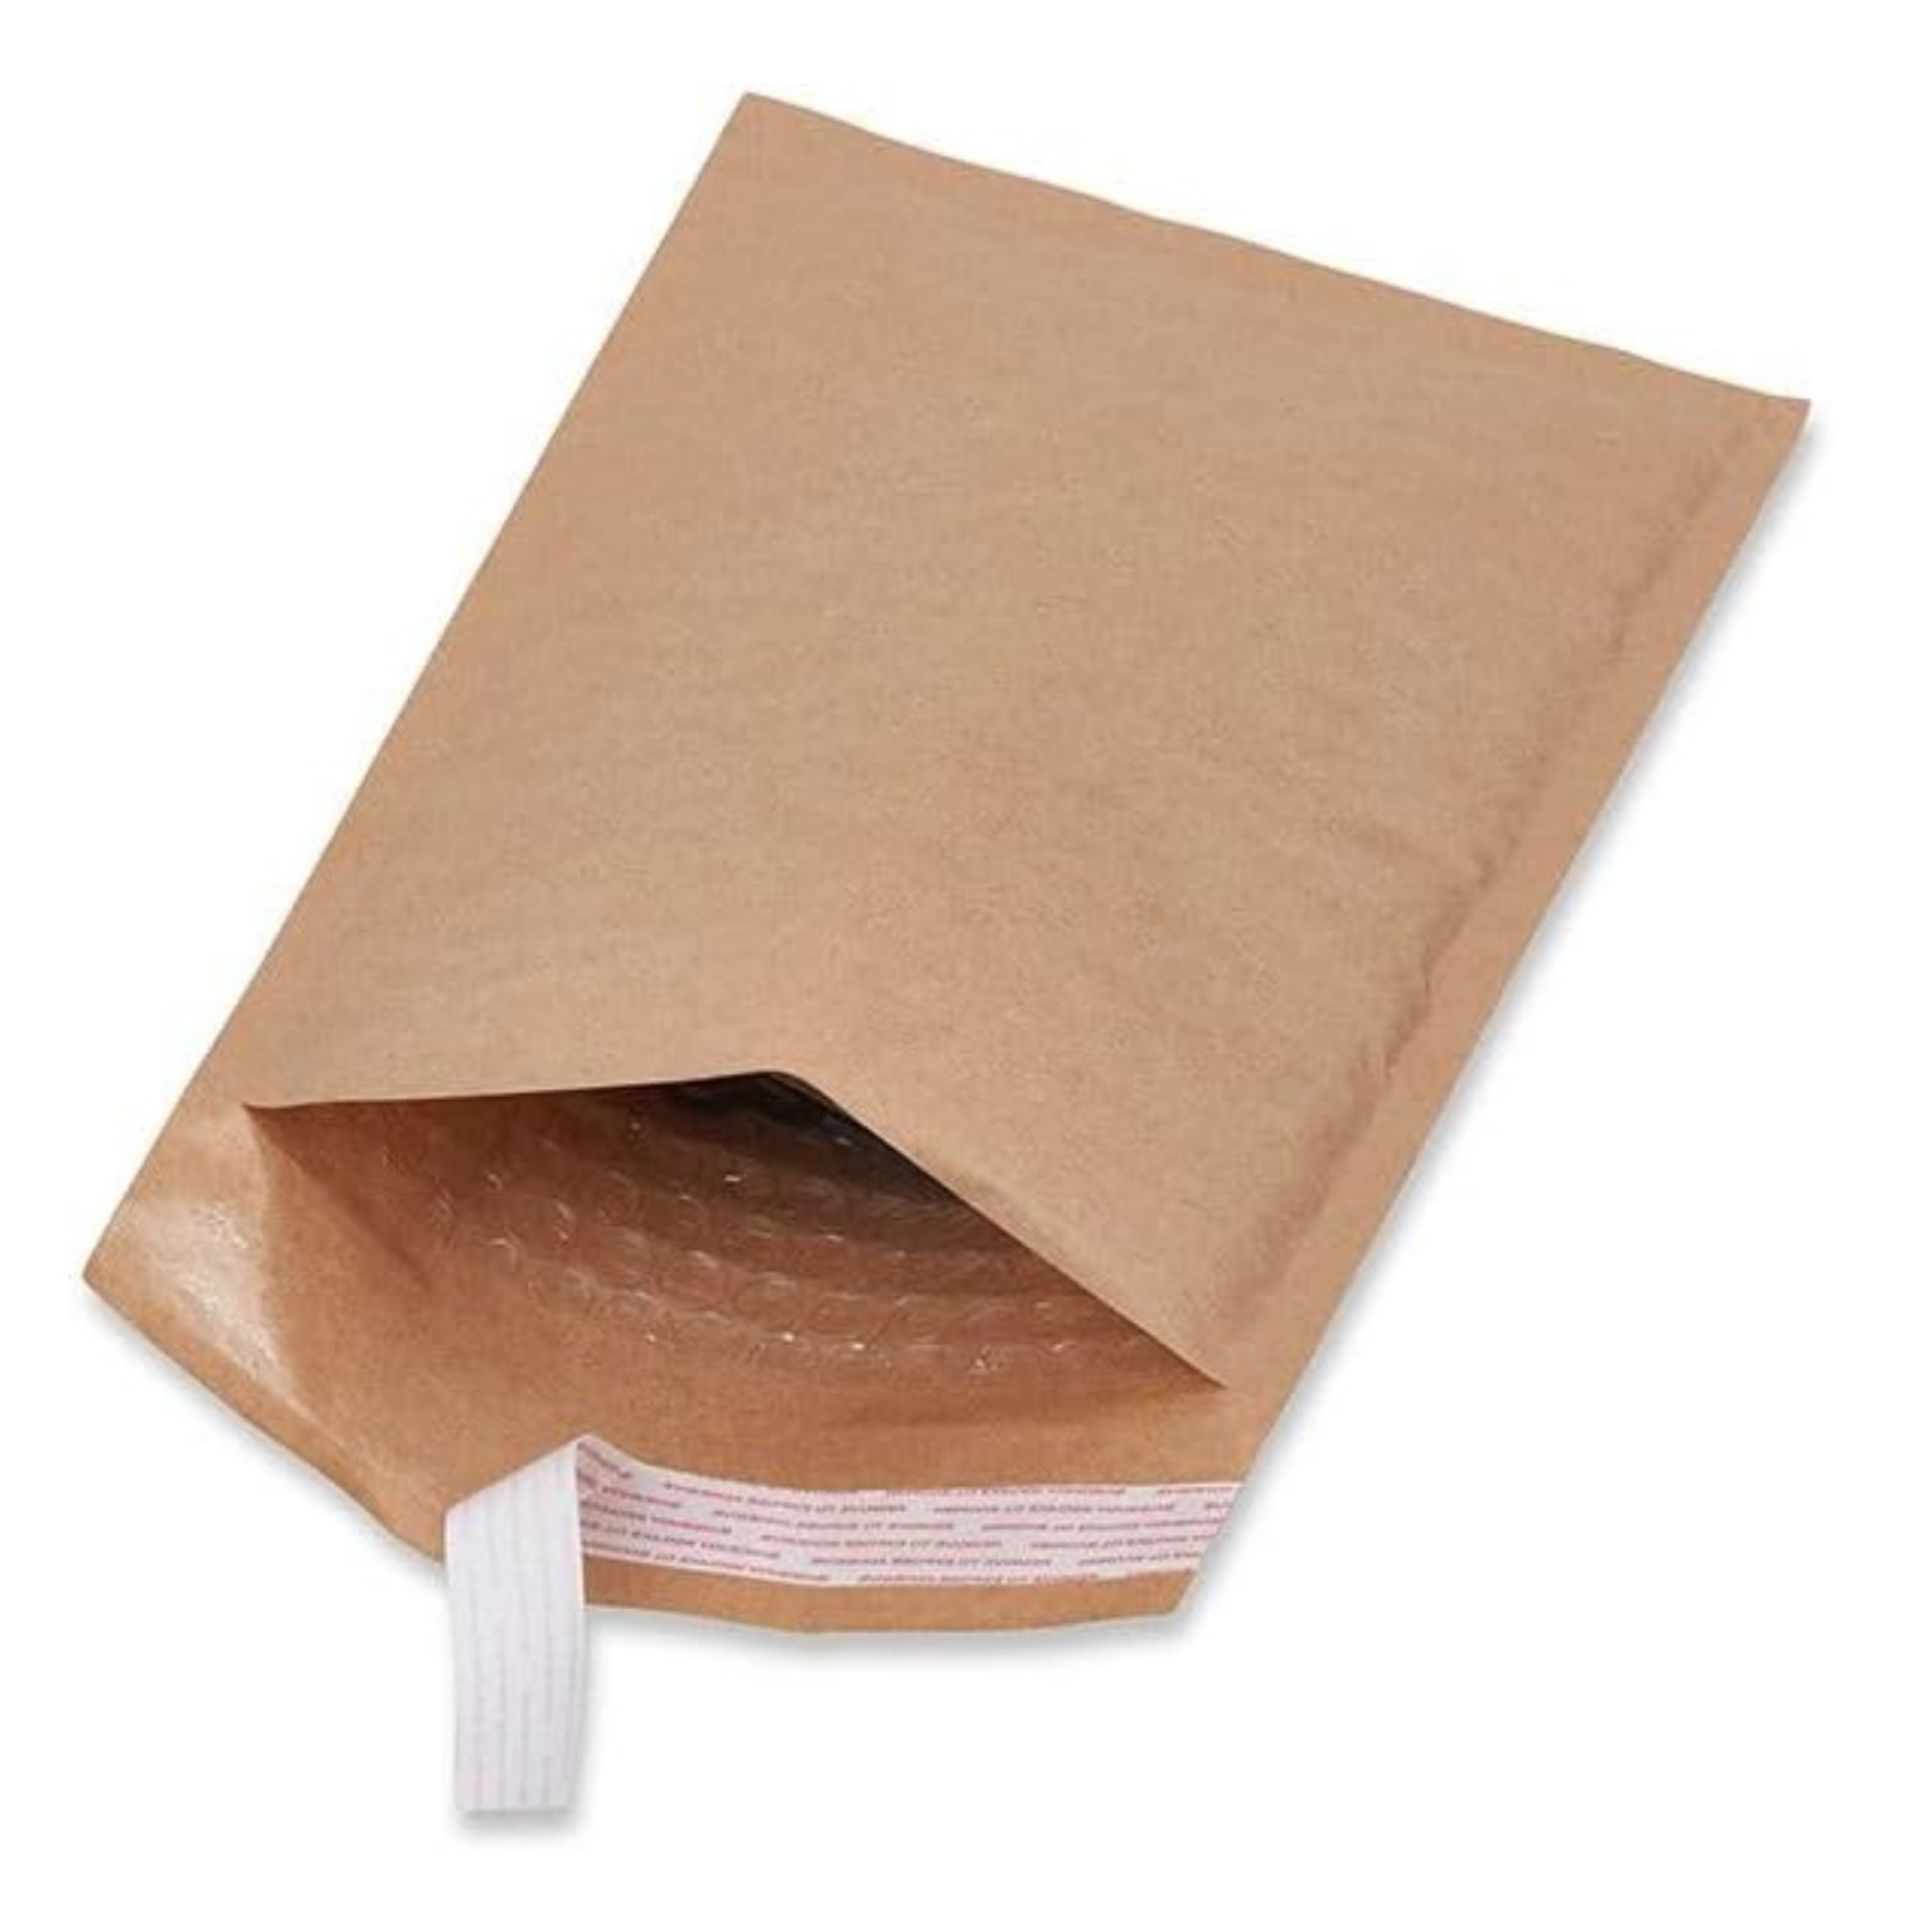 10 BOXES OF PAPER BAG ENVELOPES BUBBLE BAGS 100 PACK PEEL AND SEAL TOUGH LIGHT PADDED (120 X 165MM) - Image 2 of 4